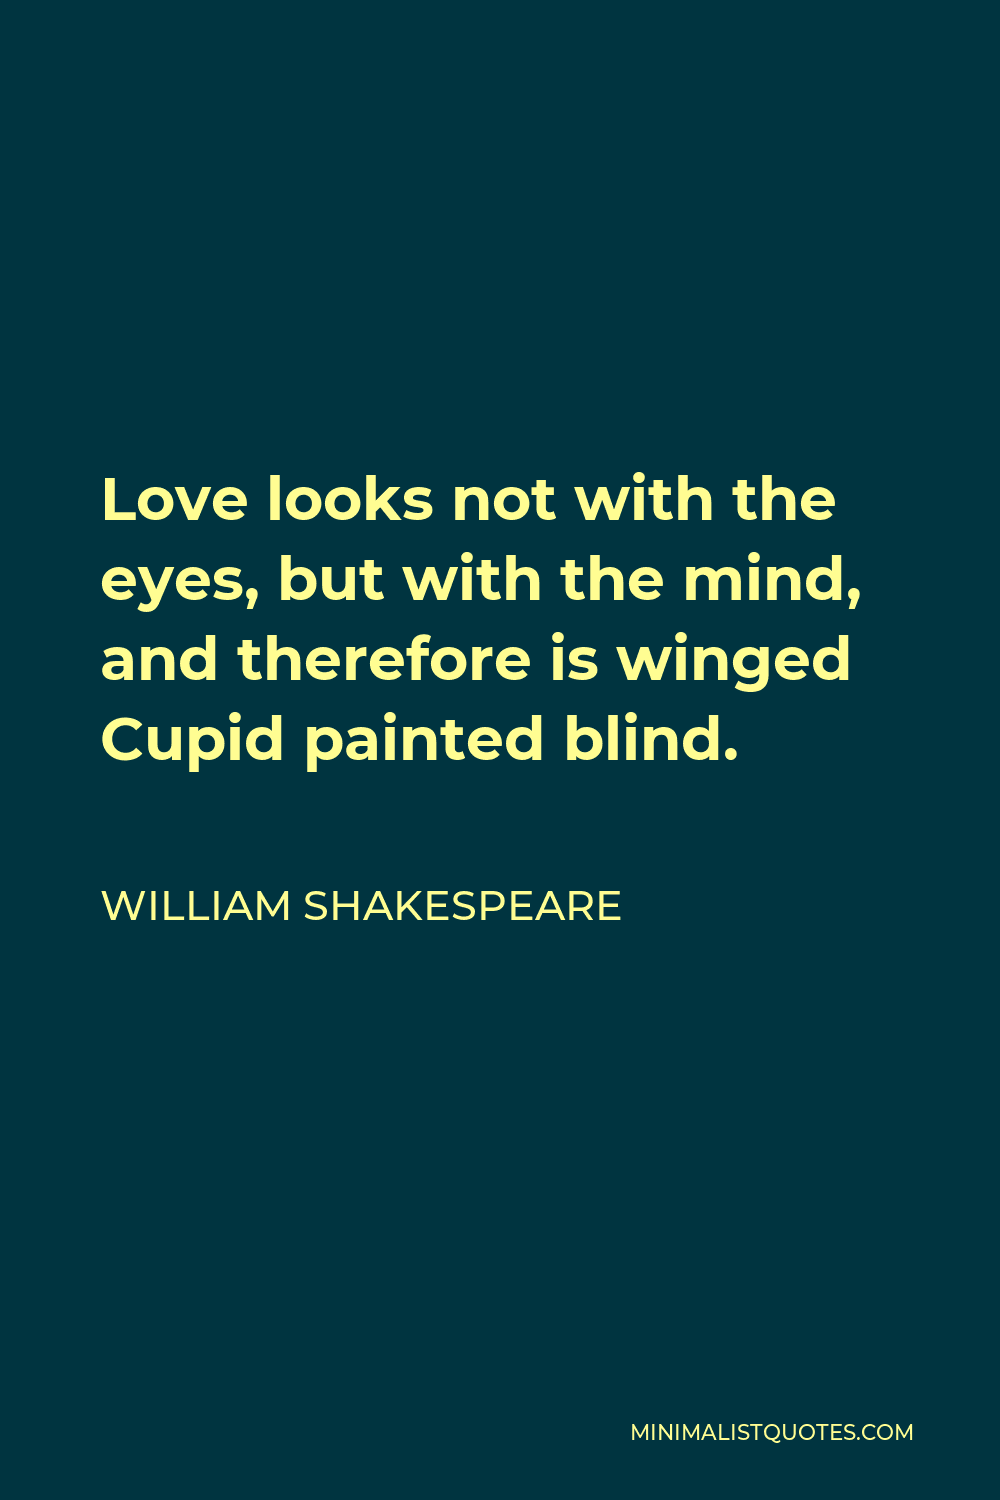 William Shakespeare Quote - Love looks not with the eyes, but with the mind, and therefore is winged Cupid painted blind.